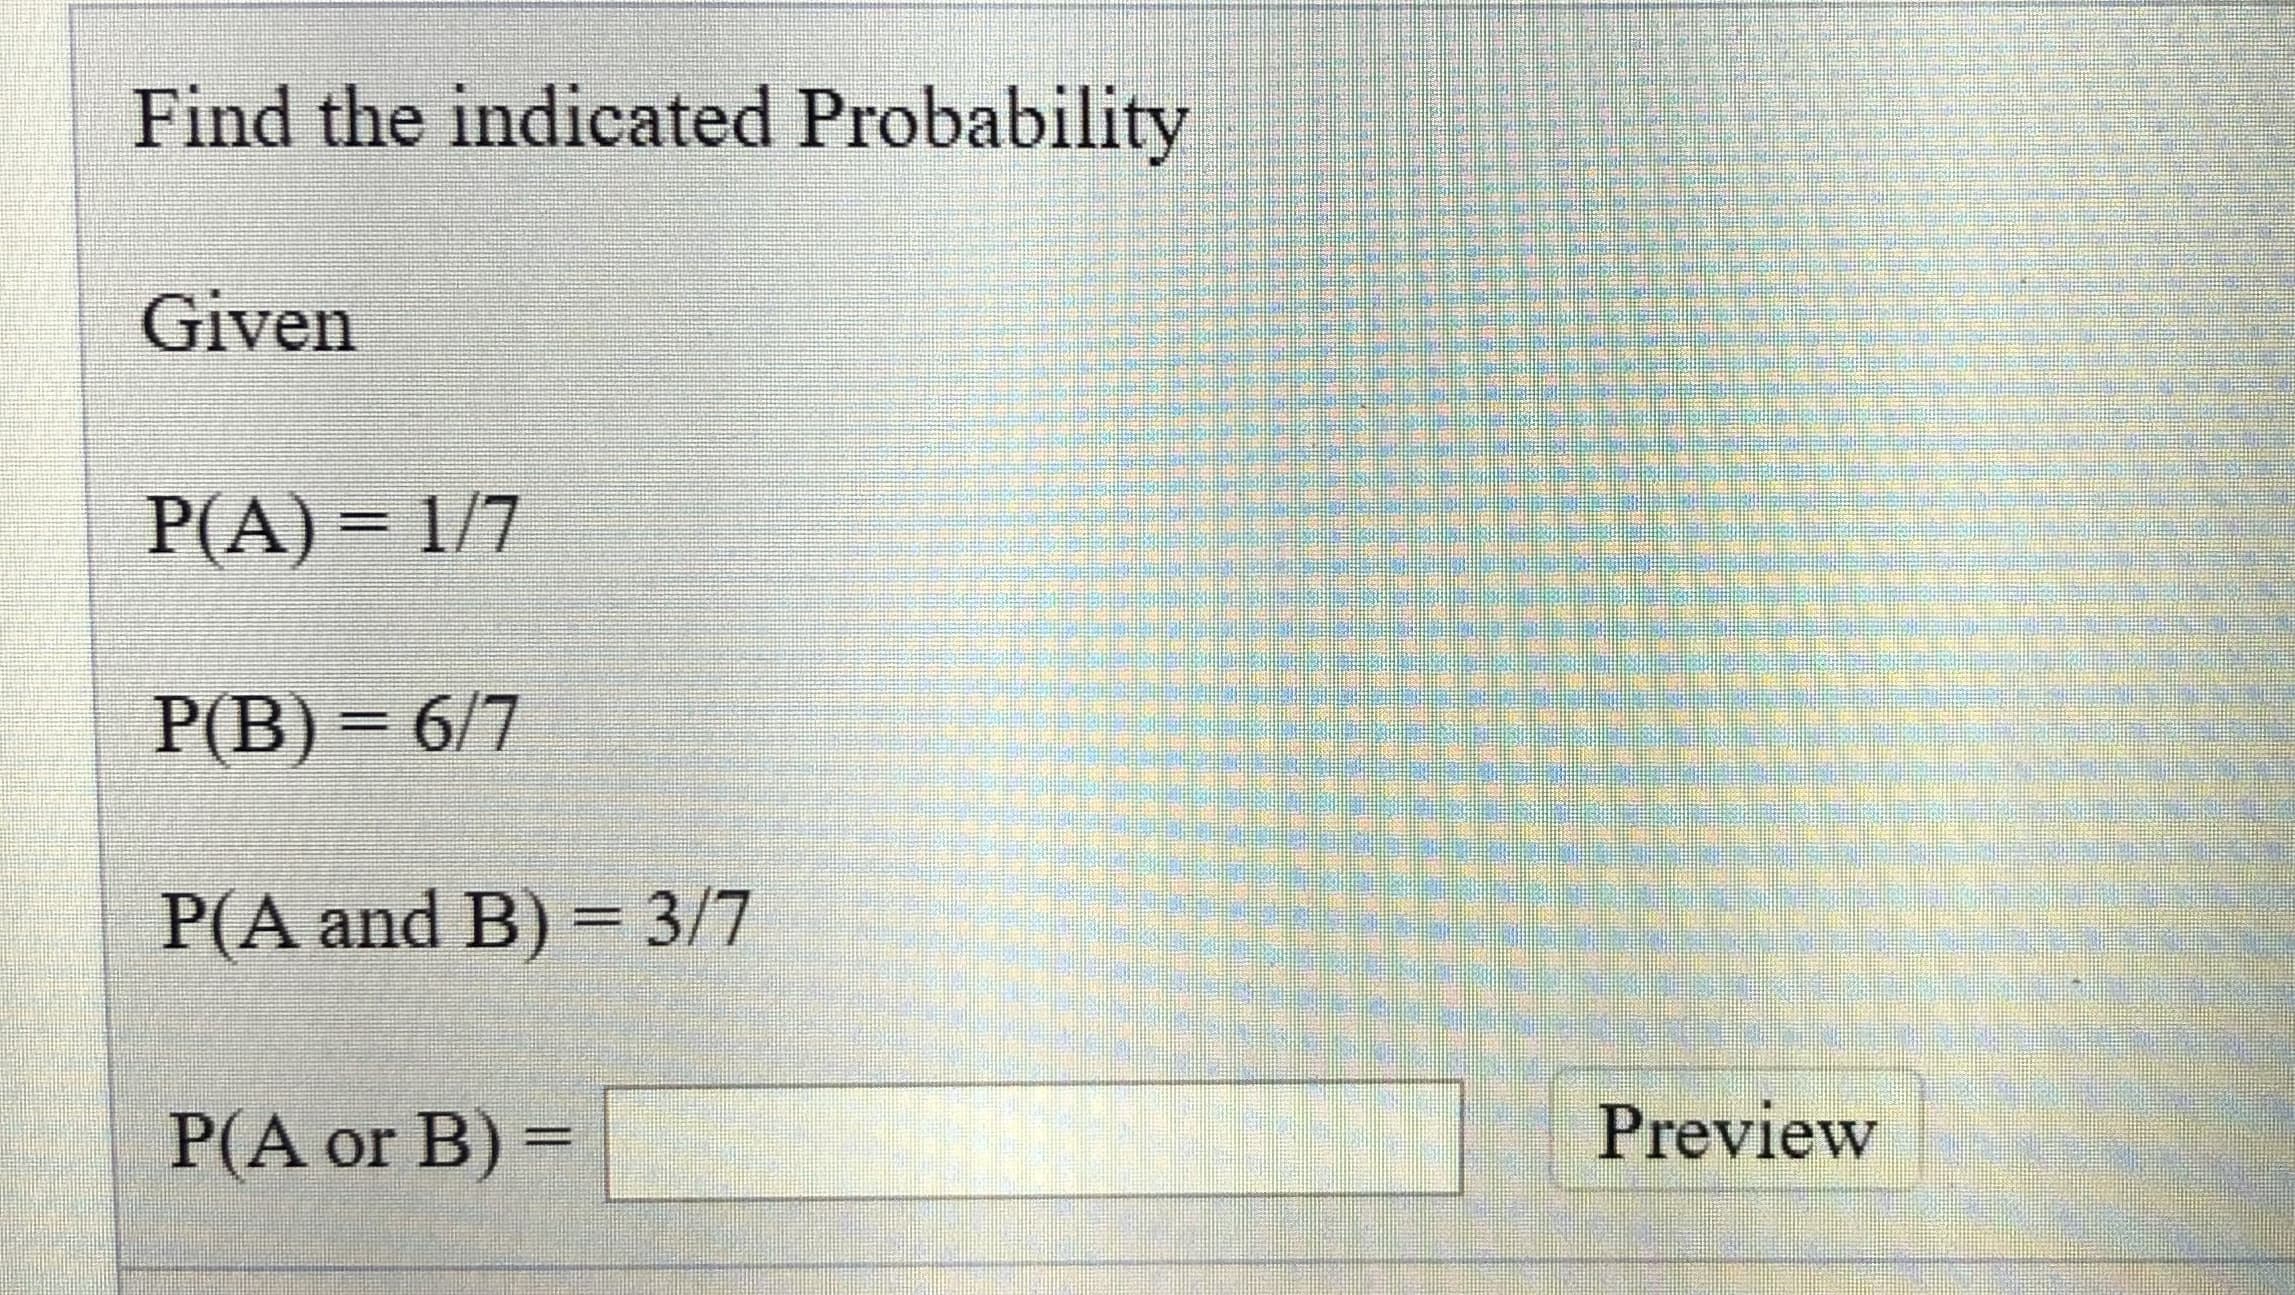 Find the indicated Probability
Given
P(A) = 1/7
P(B) = 6/7
%3D
P(A and B) = 3/7
P(A or B) =
Preview
